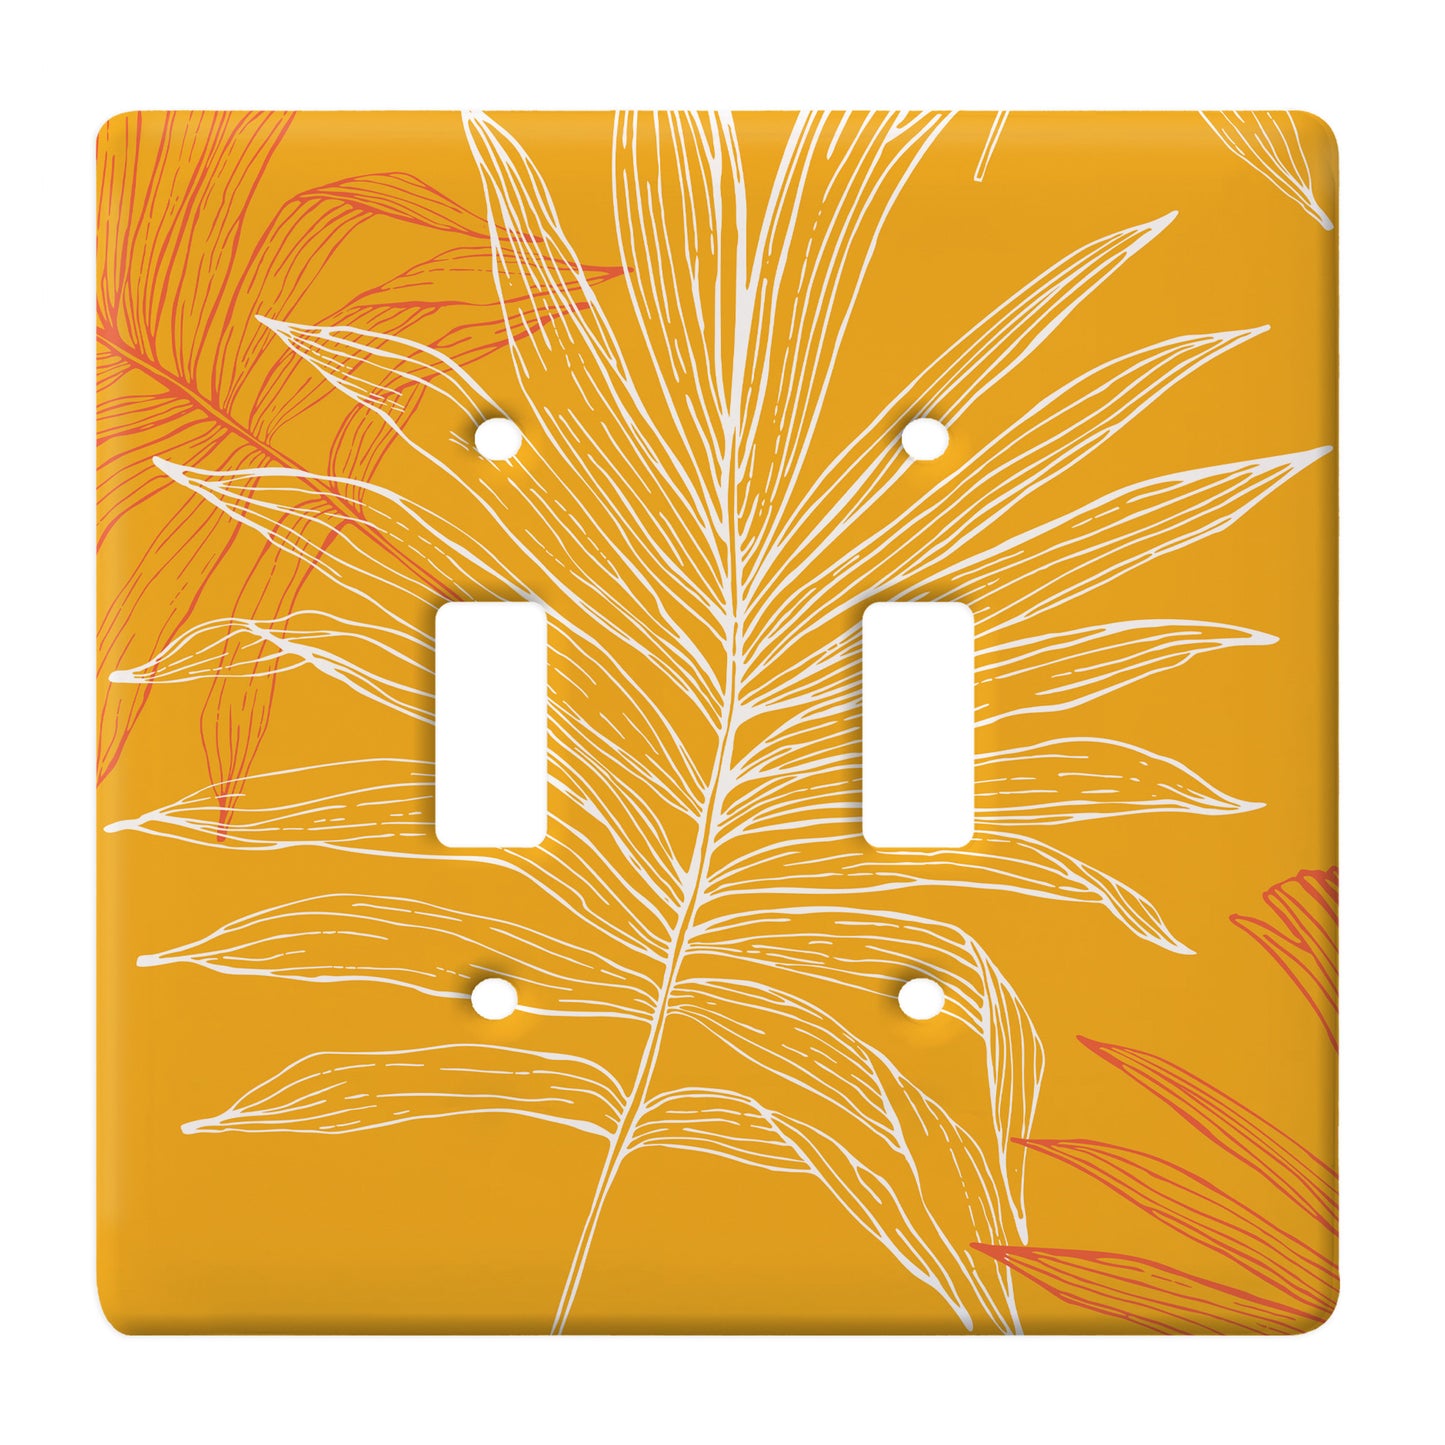 orange ceramic double toggle switch plate featuring white and deeper orange graphics of palm leaves.